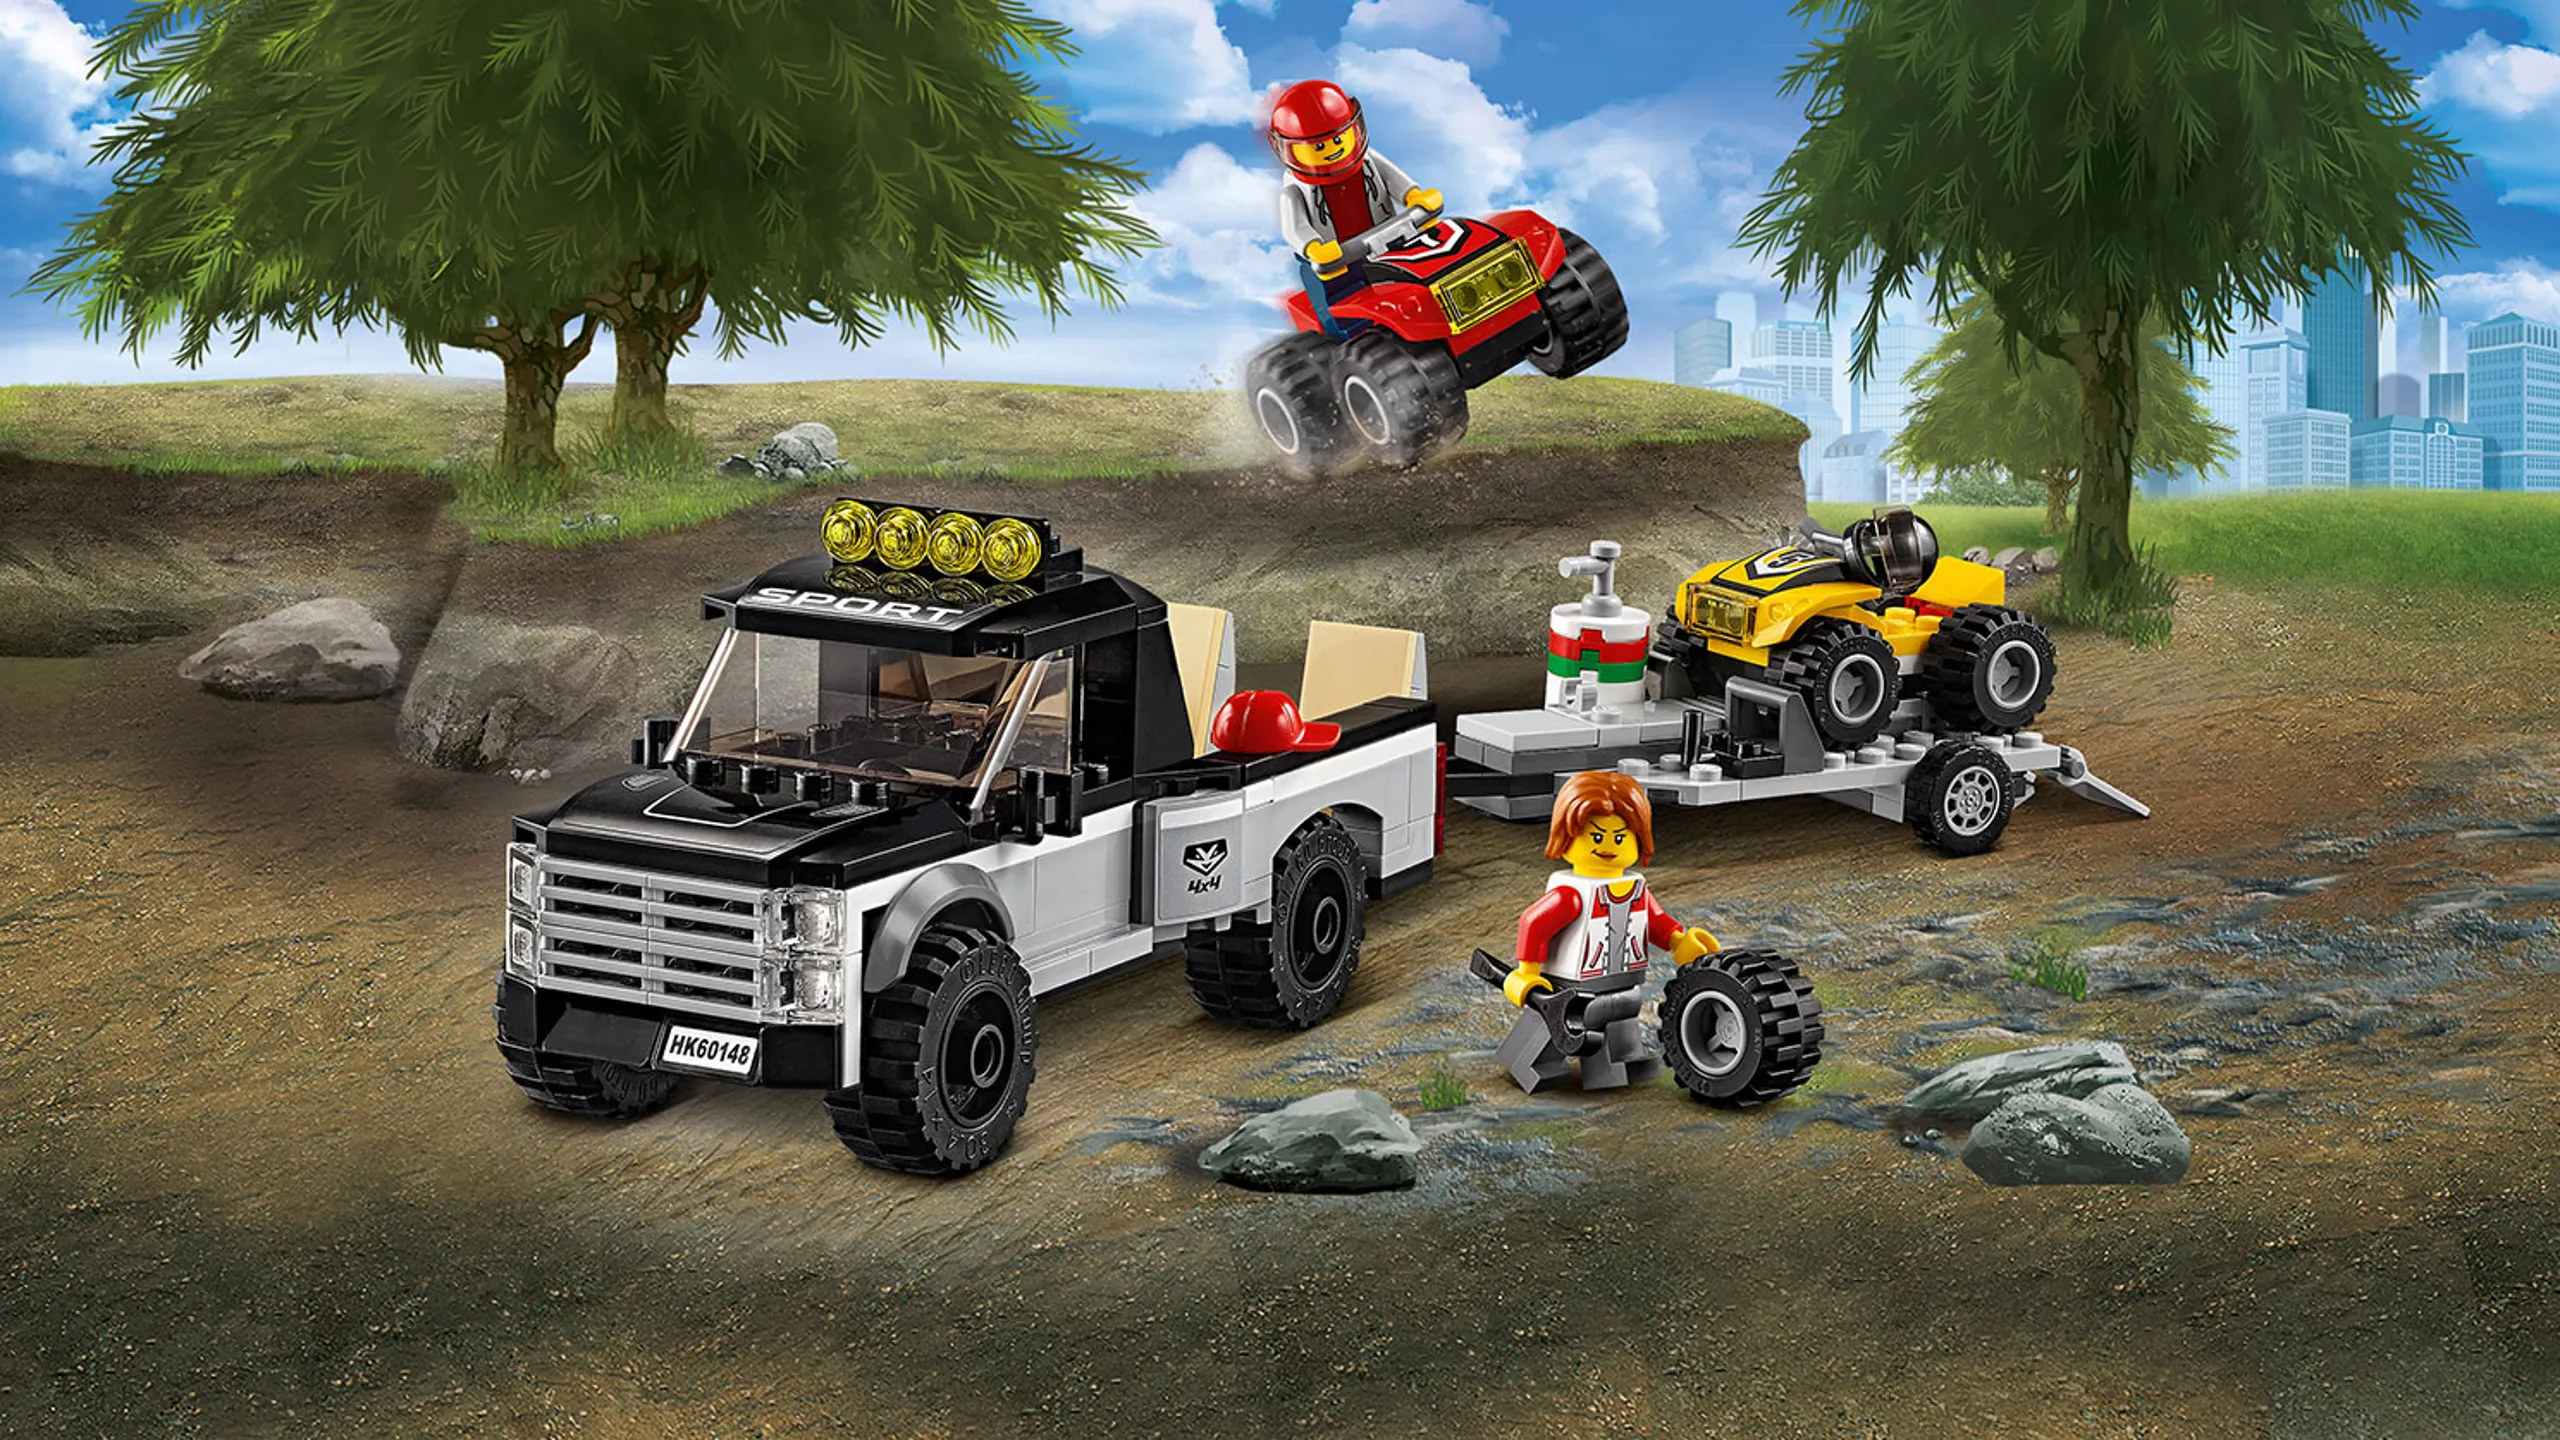 LEGO City Great Vehicles - 60148 ATV Race Team - Drive the ATV out to the track on a trailer.